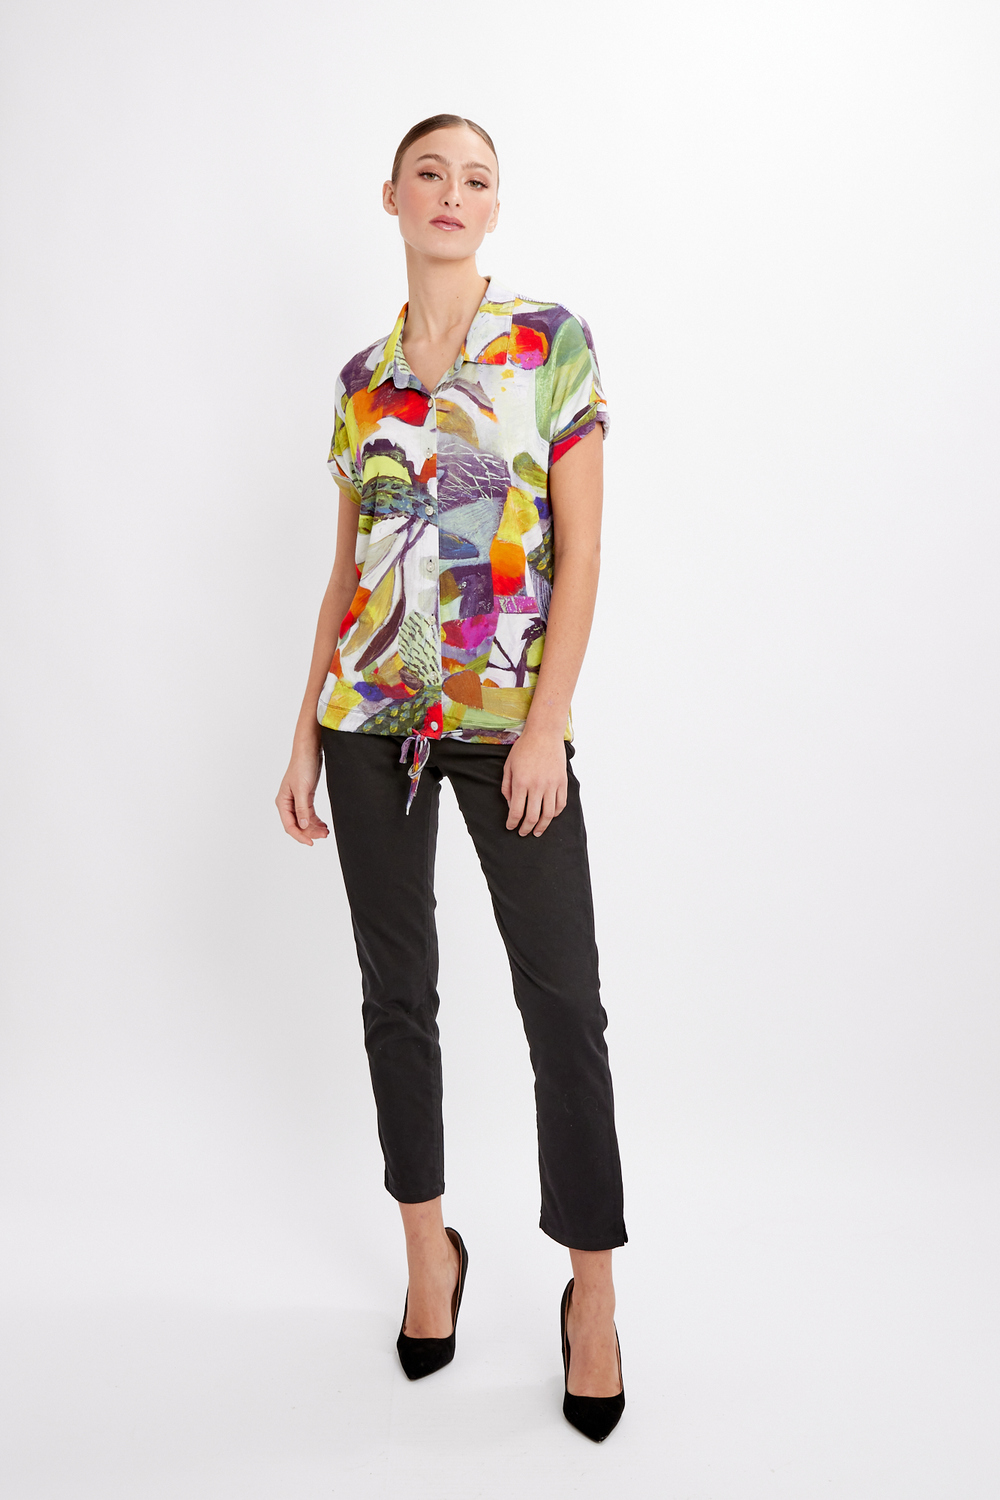 Summer Knot-Front Shirt Style 24693. As Sample